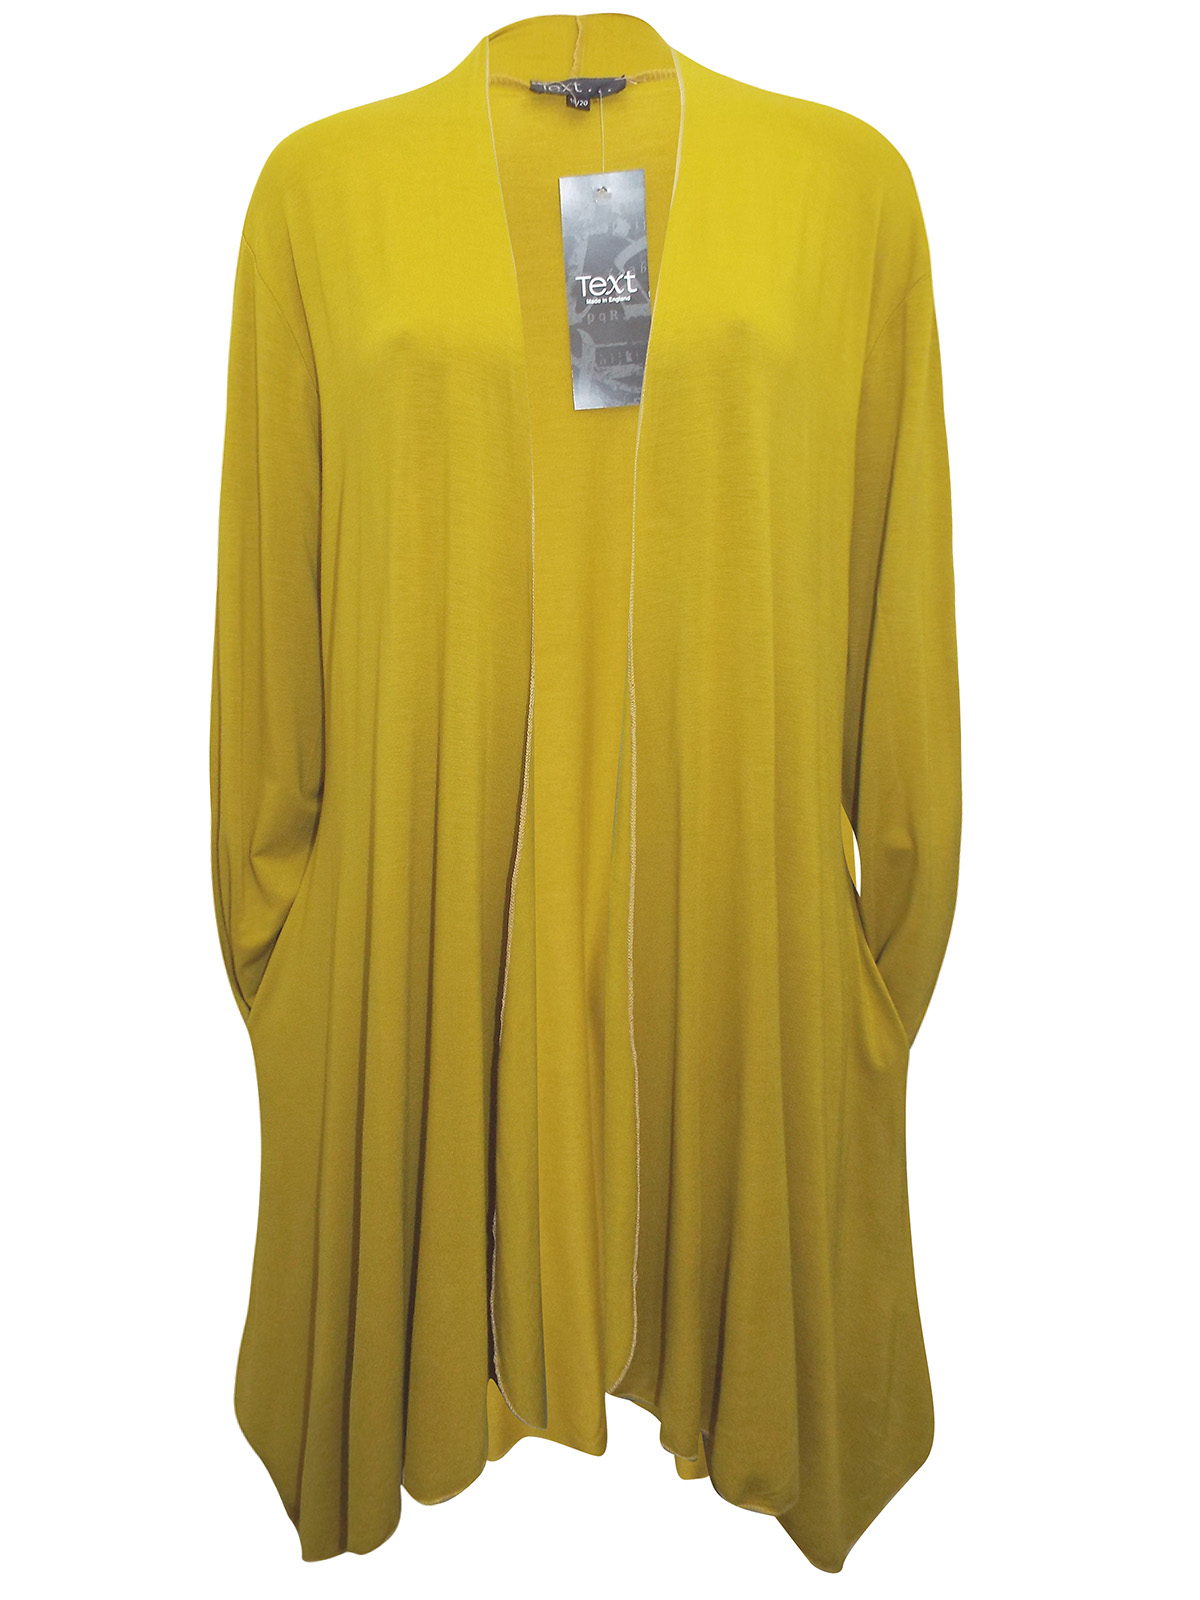 //text.. - - LIME Open Front Long Sleeve Jersey Cardigan - Plus Size 18 ...